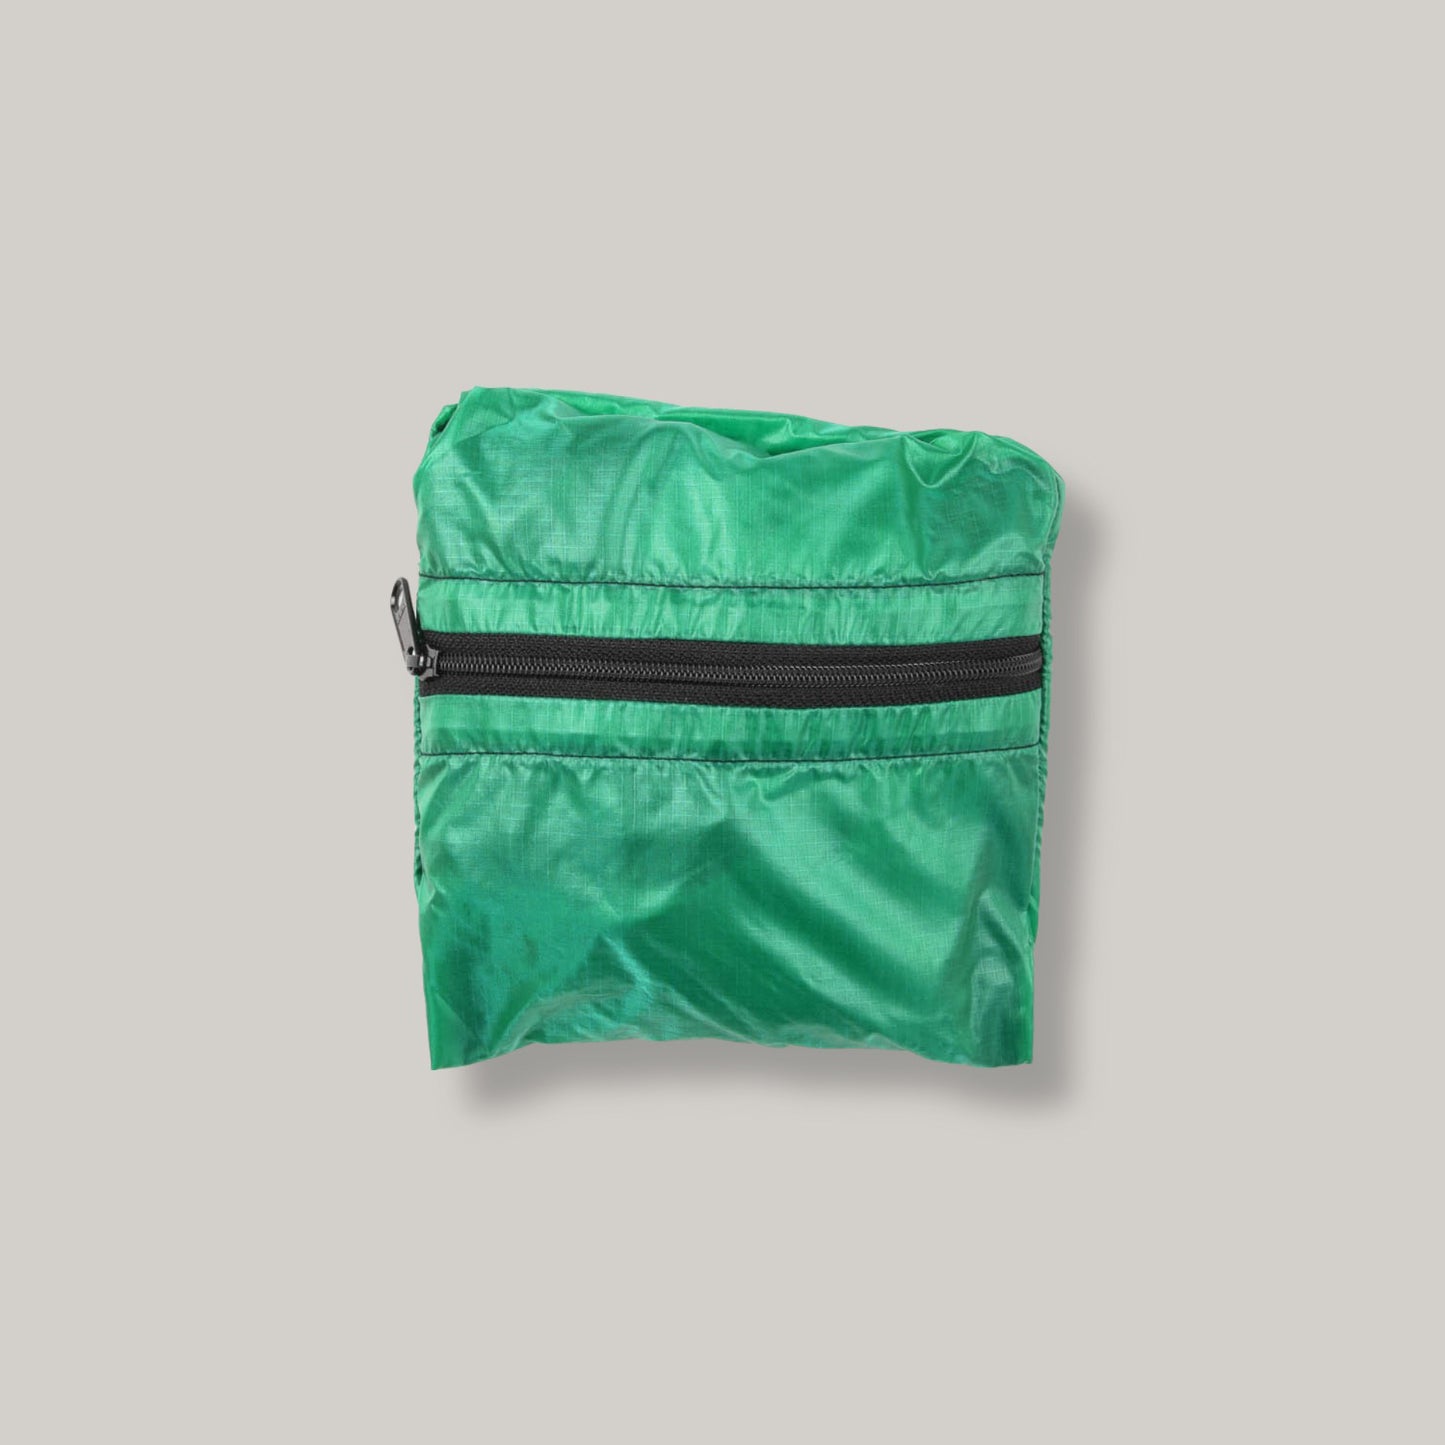 EPPERSON MOUNTAINEERING LARGE PACKABLE CLIMB TOTE - KELLY GREEN